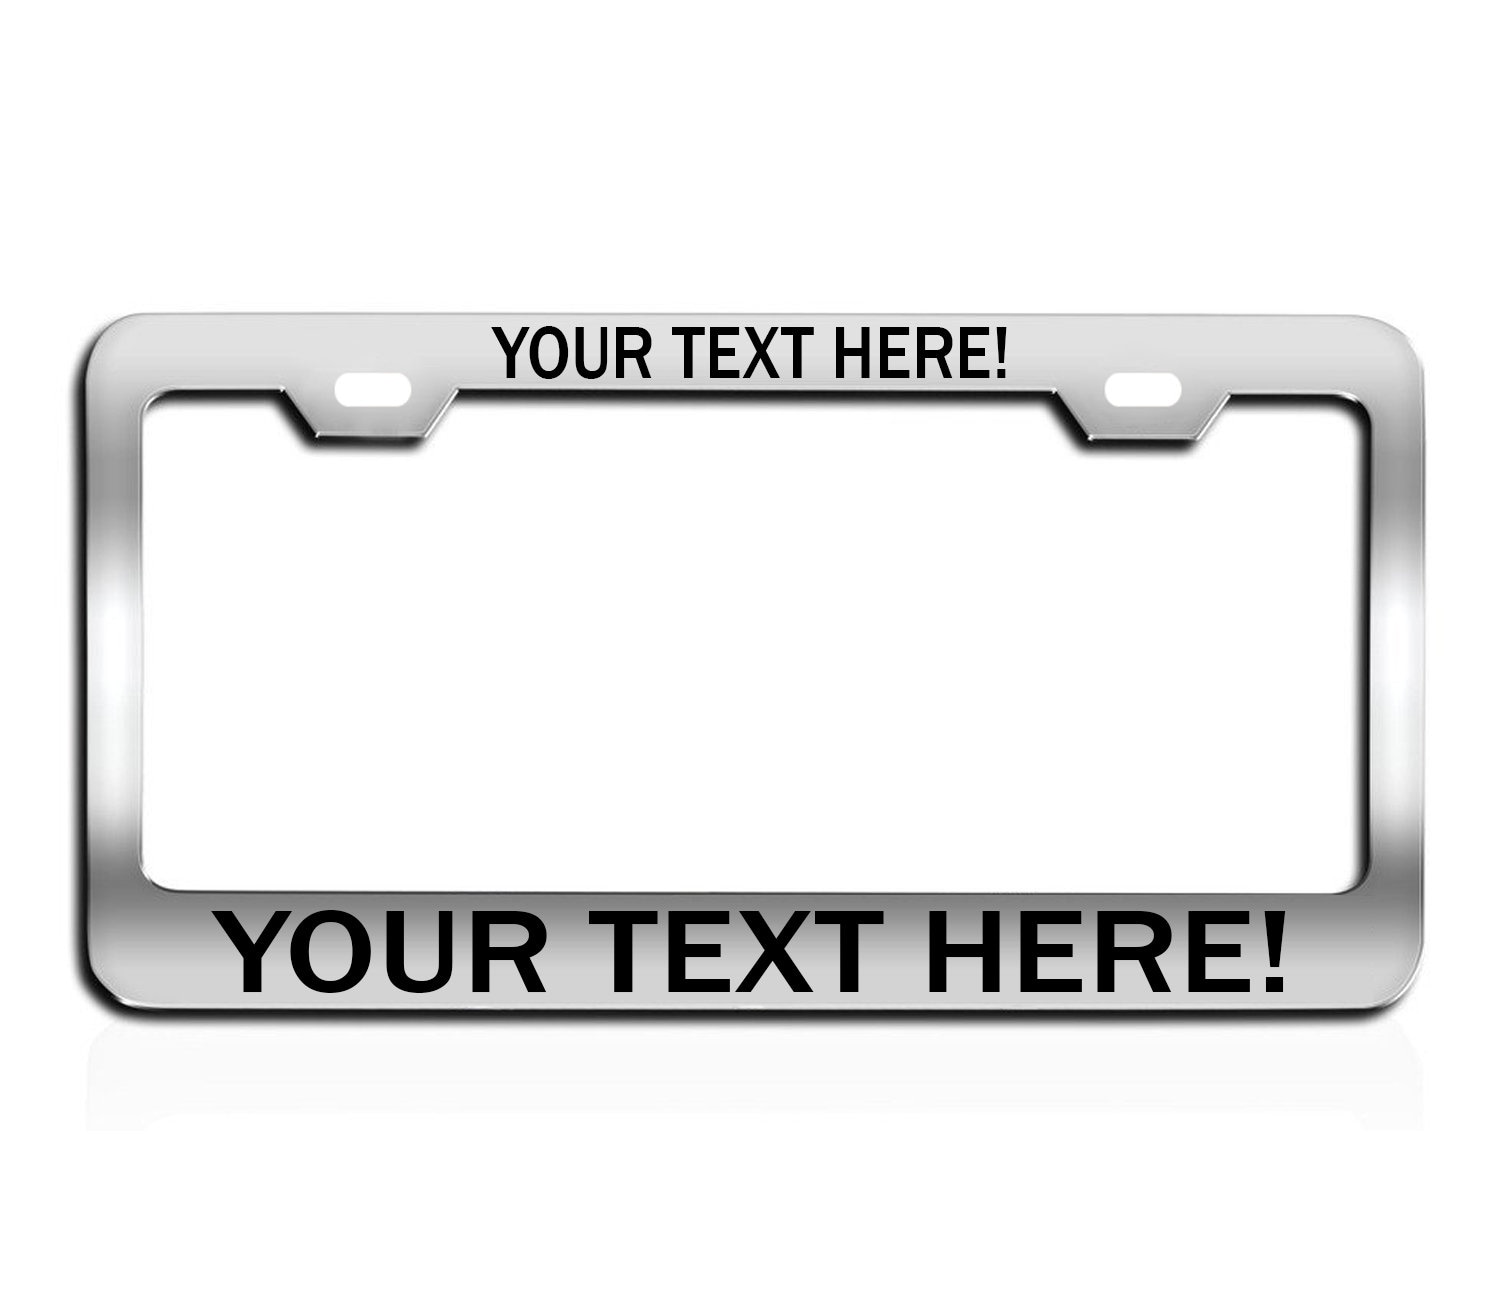 Custom Auto Car Truck Tag Frame Personalized Black License Plate Frame Humor Plate Cover Holder US Standard 